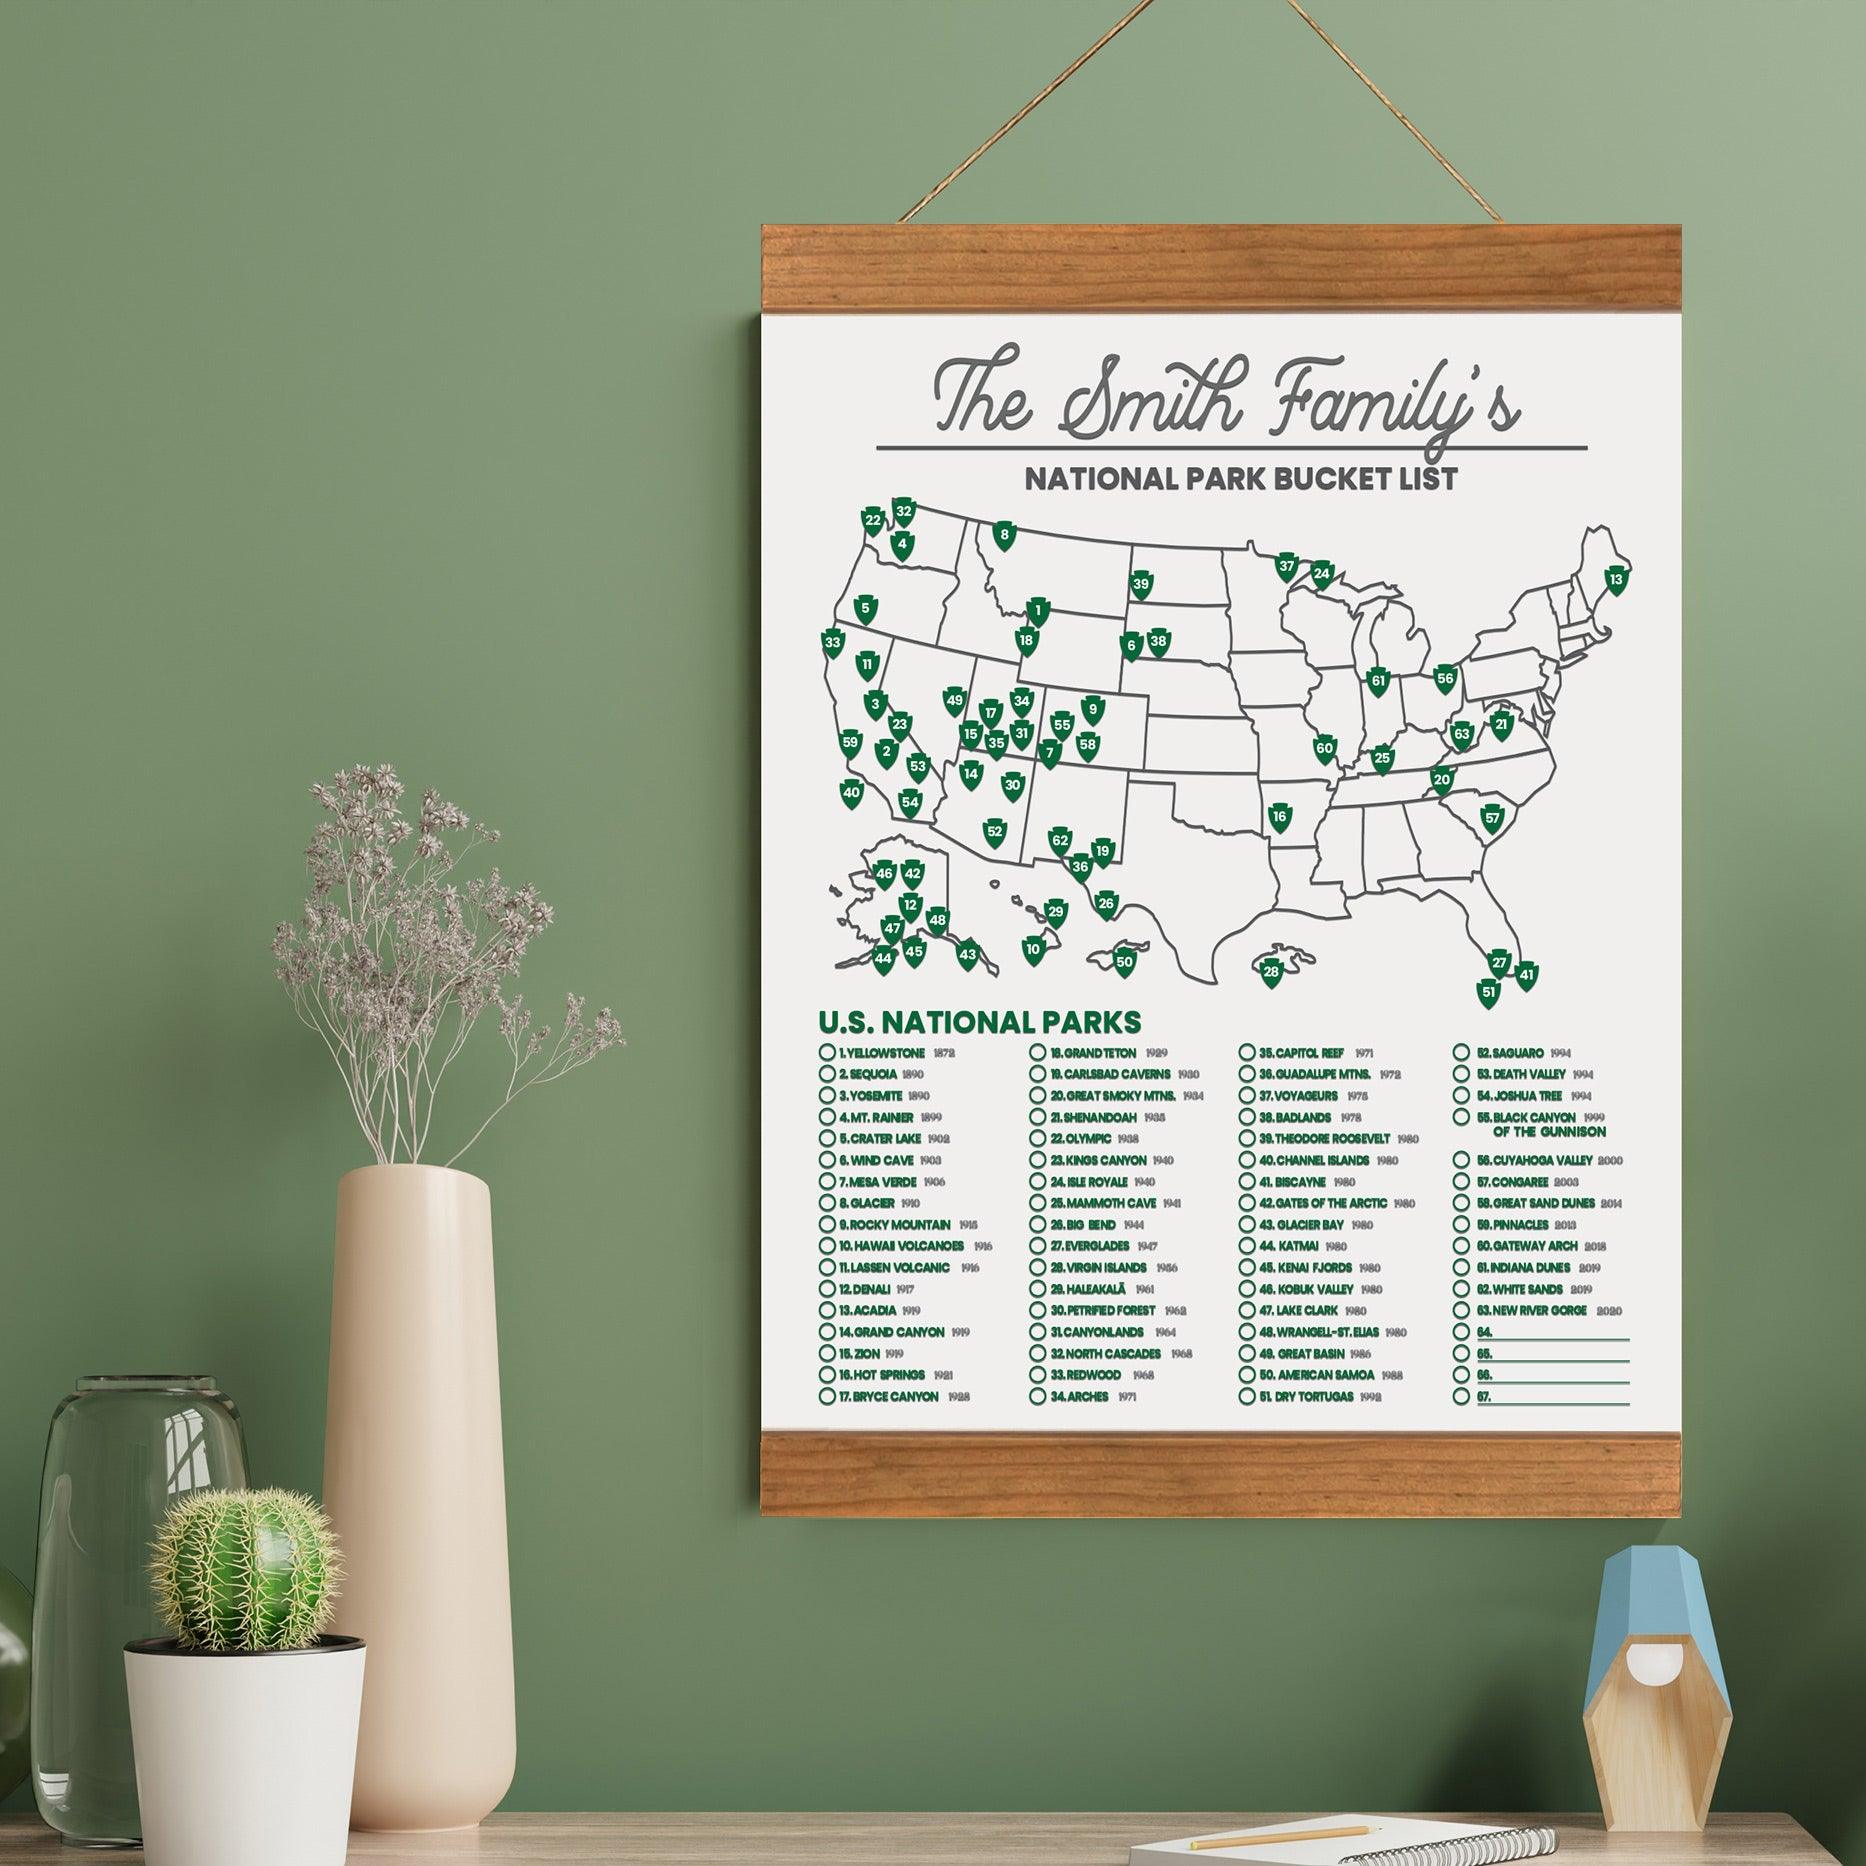 XL Personalized U.S. National Park Bucket List Map on Canvas